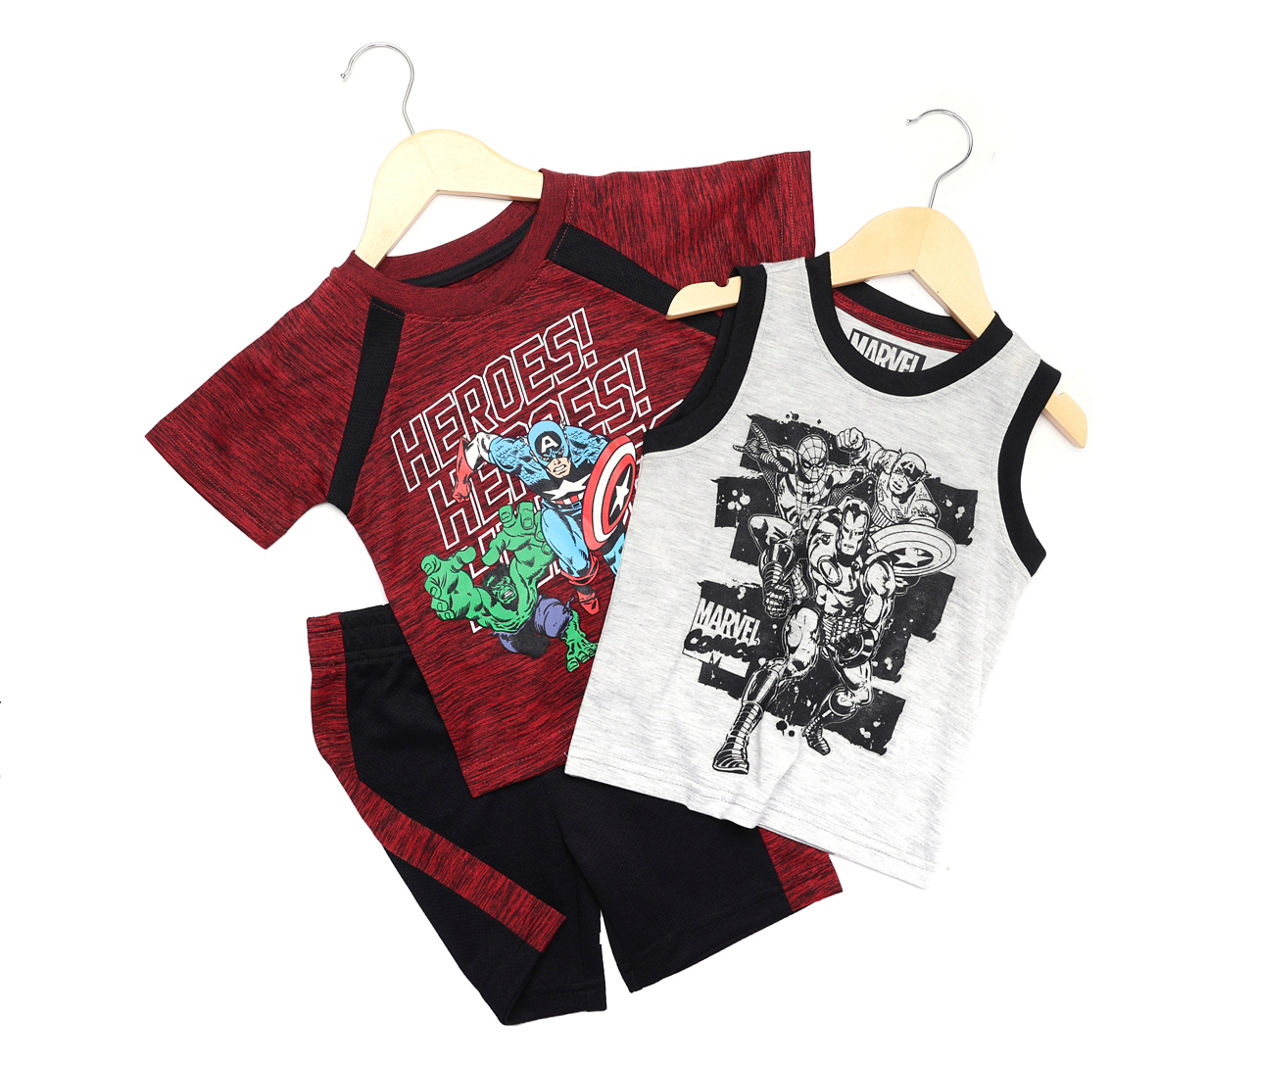 Toddler Size 3T Red & Black Avengers 3-Piece Performance Outfit